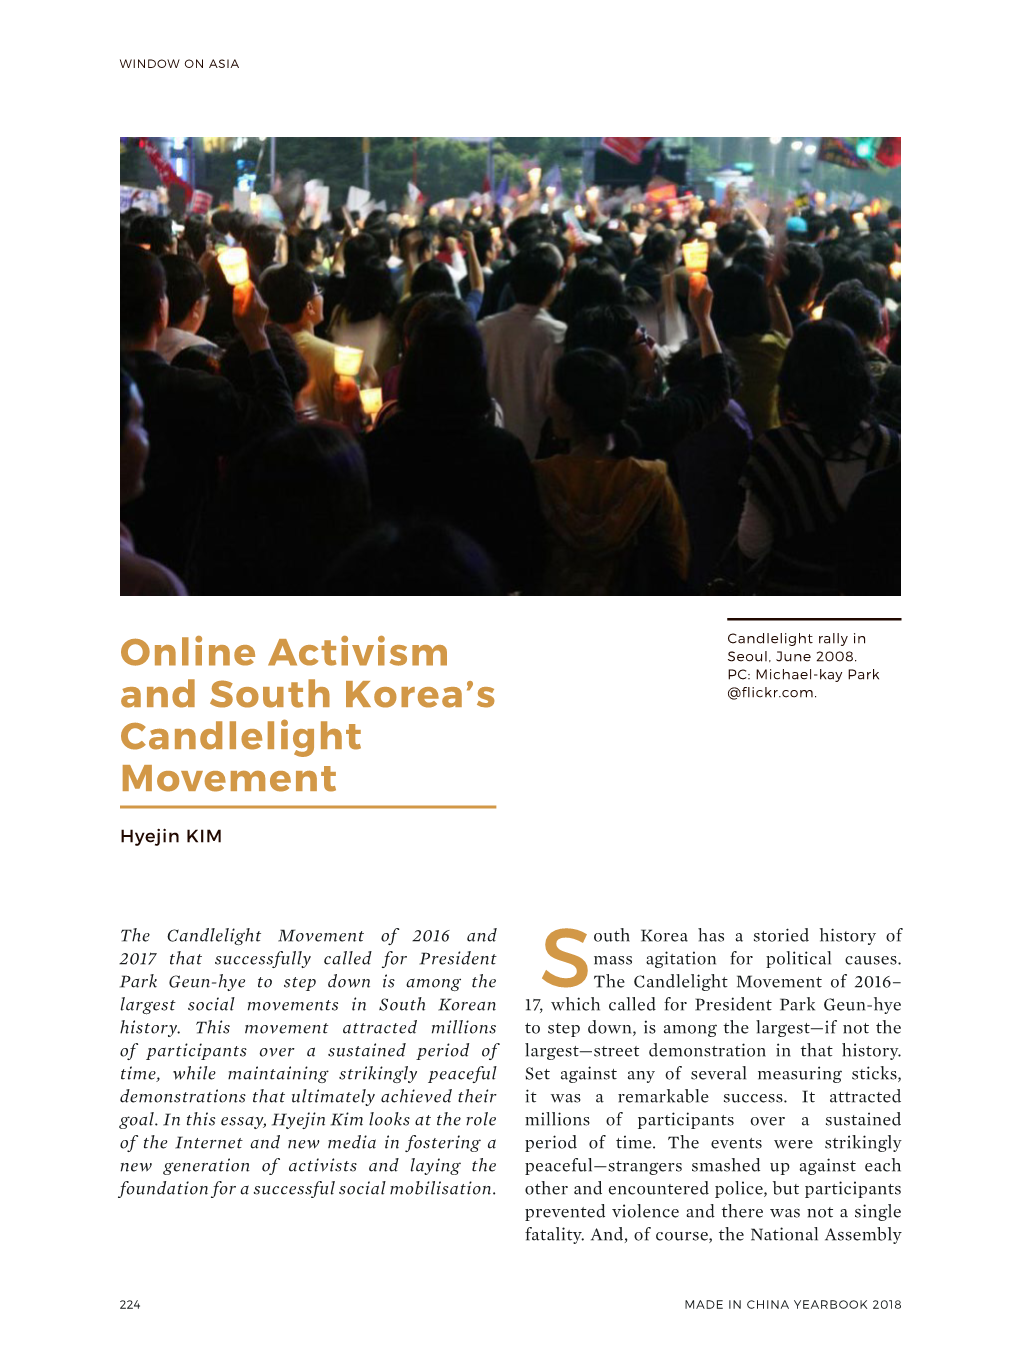 Online Activism and South Korea's Candlelight Movement